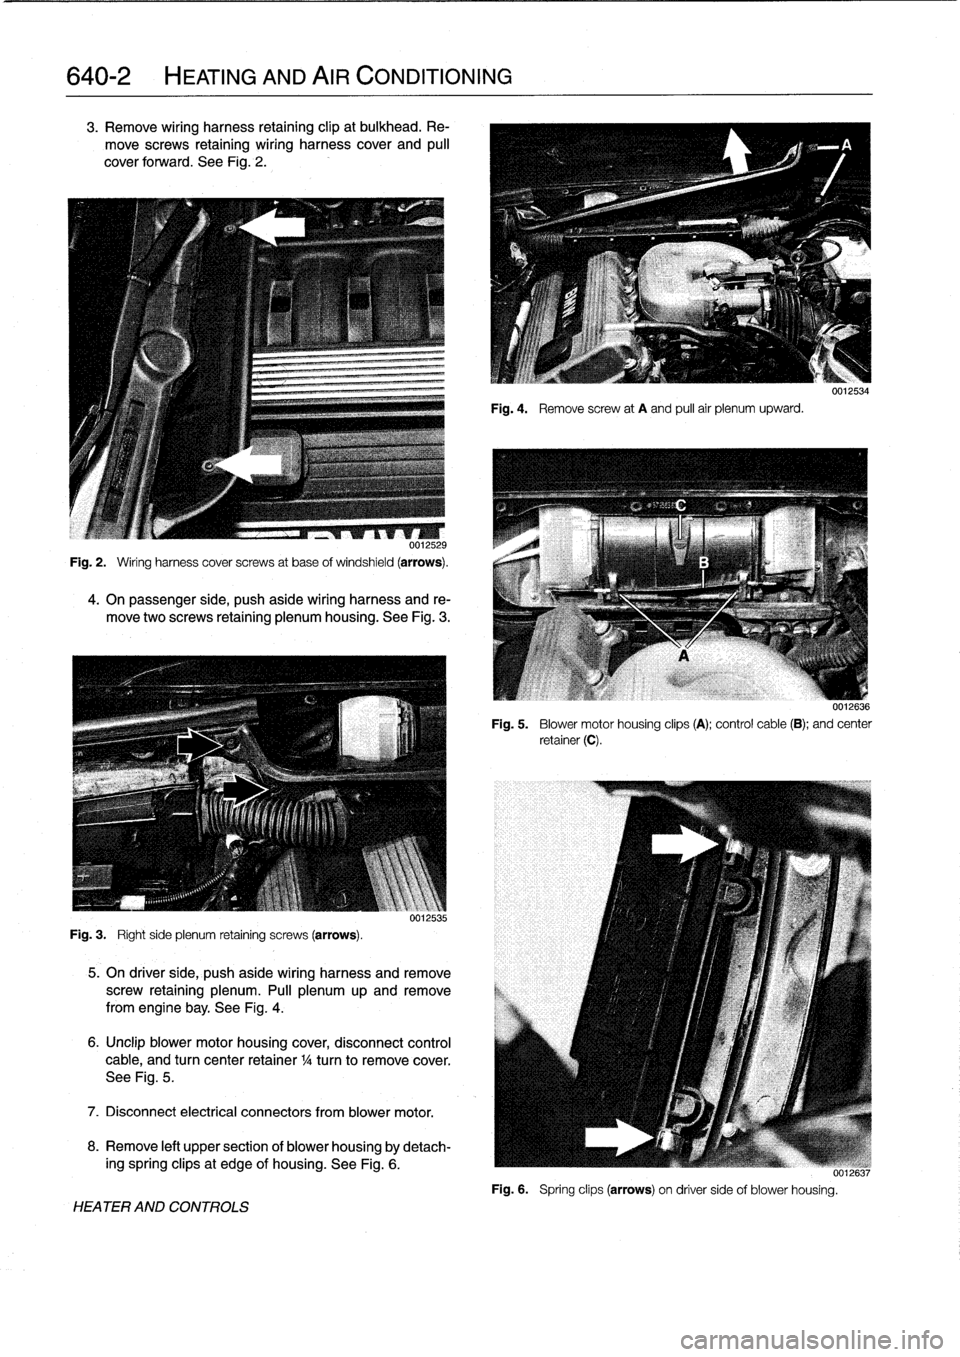 BMW 328i 1998 E36 Workshop Manual 
640-2

	

HEATING
AND
AIR
CONDITIONING

3
.
Remove
wiring
harness
retaining
clip
at
bulkhead
.
Re-

move
screws
retaining
wiring
harness
cover
and
pull

cover
forward
.
See
Fig
.
2
.

0012529

Fig
.
